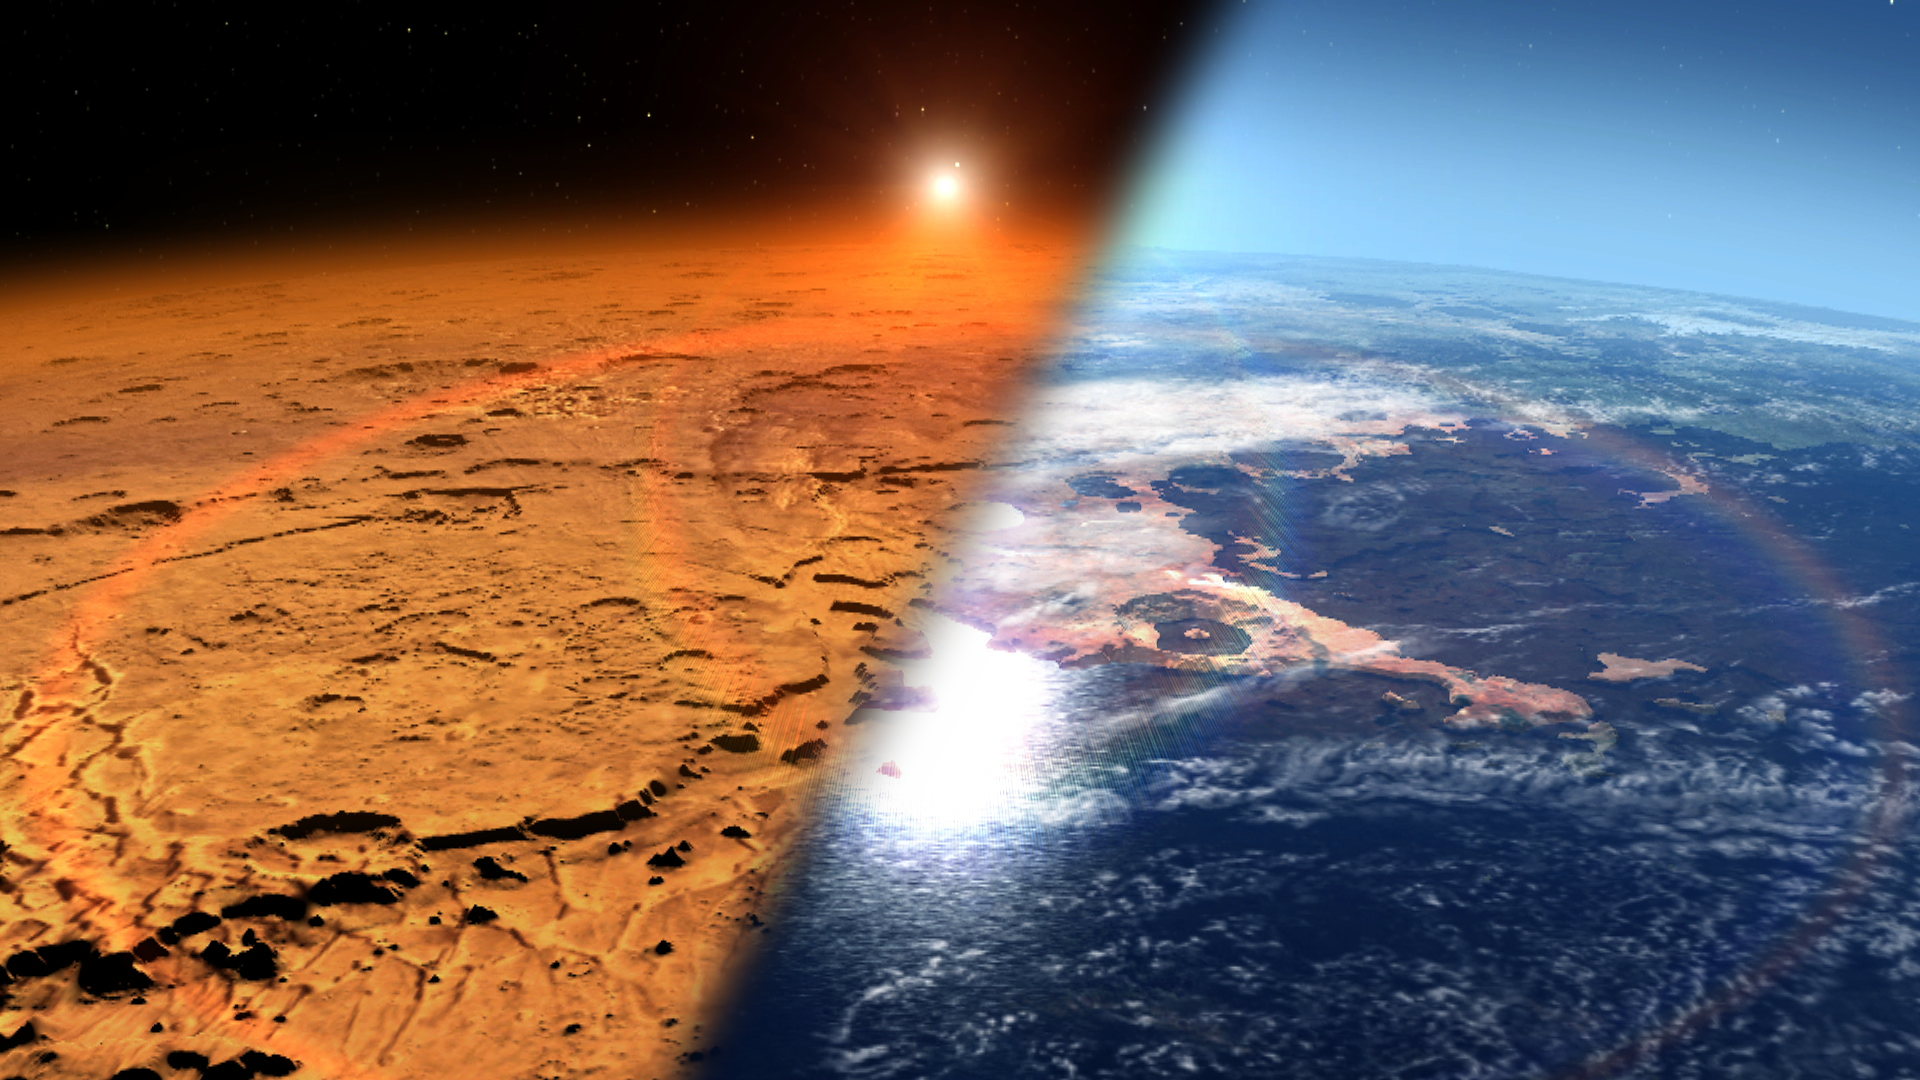 Mars' early atmosphere was very different from the one we see today.